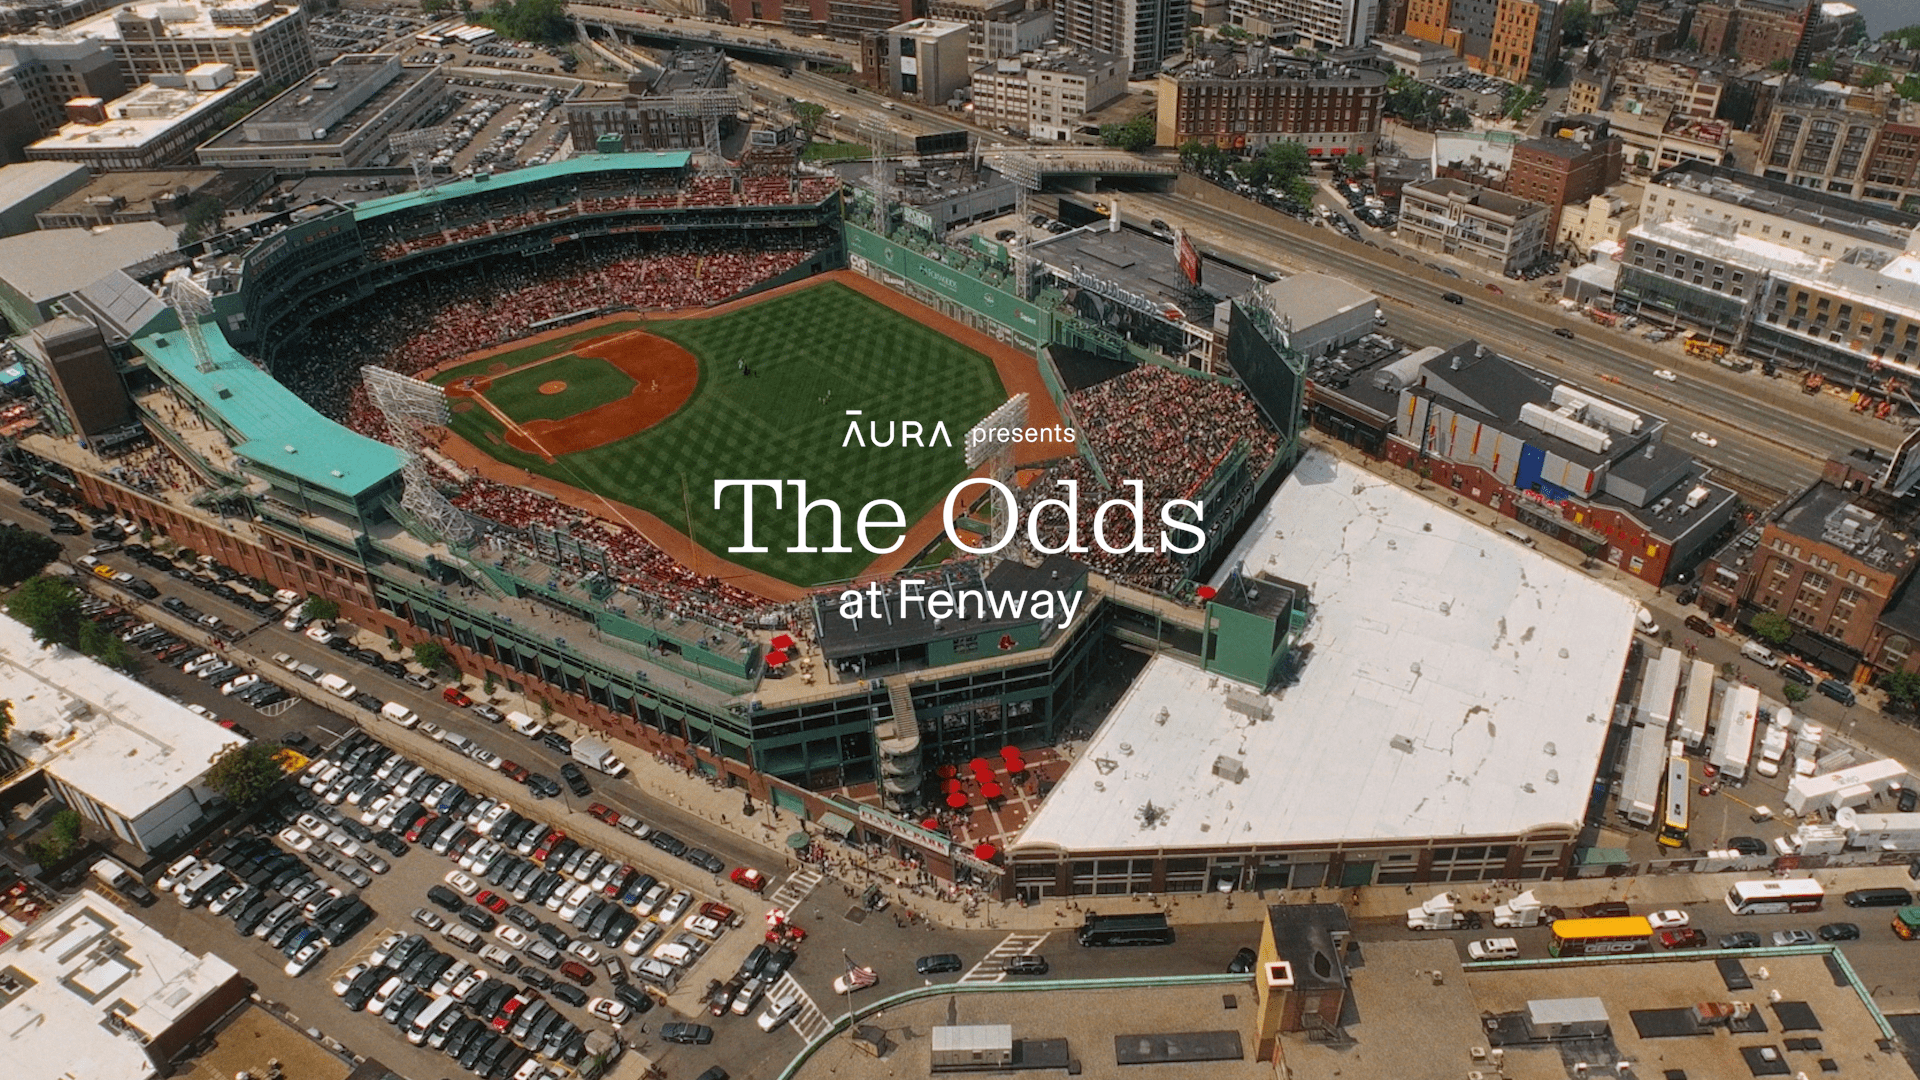 Aura and Robert Downey Jr. Help Beat “The Odds” in Fenway Park 